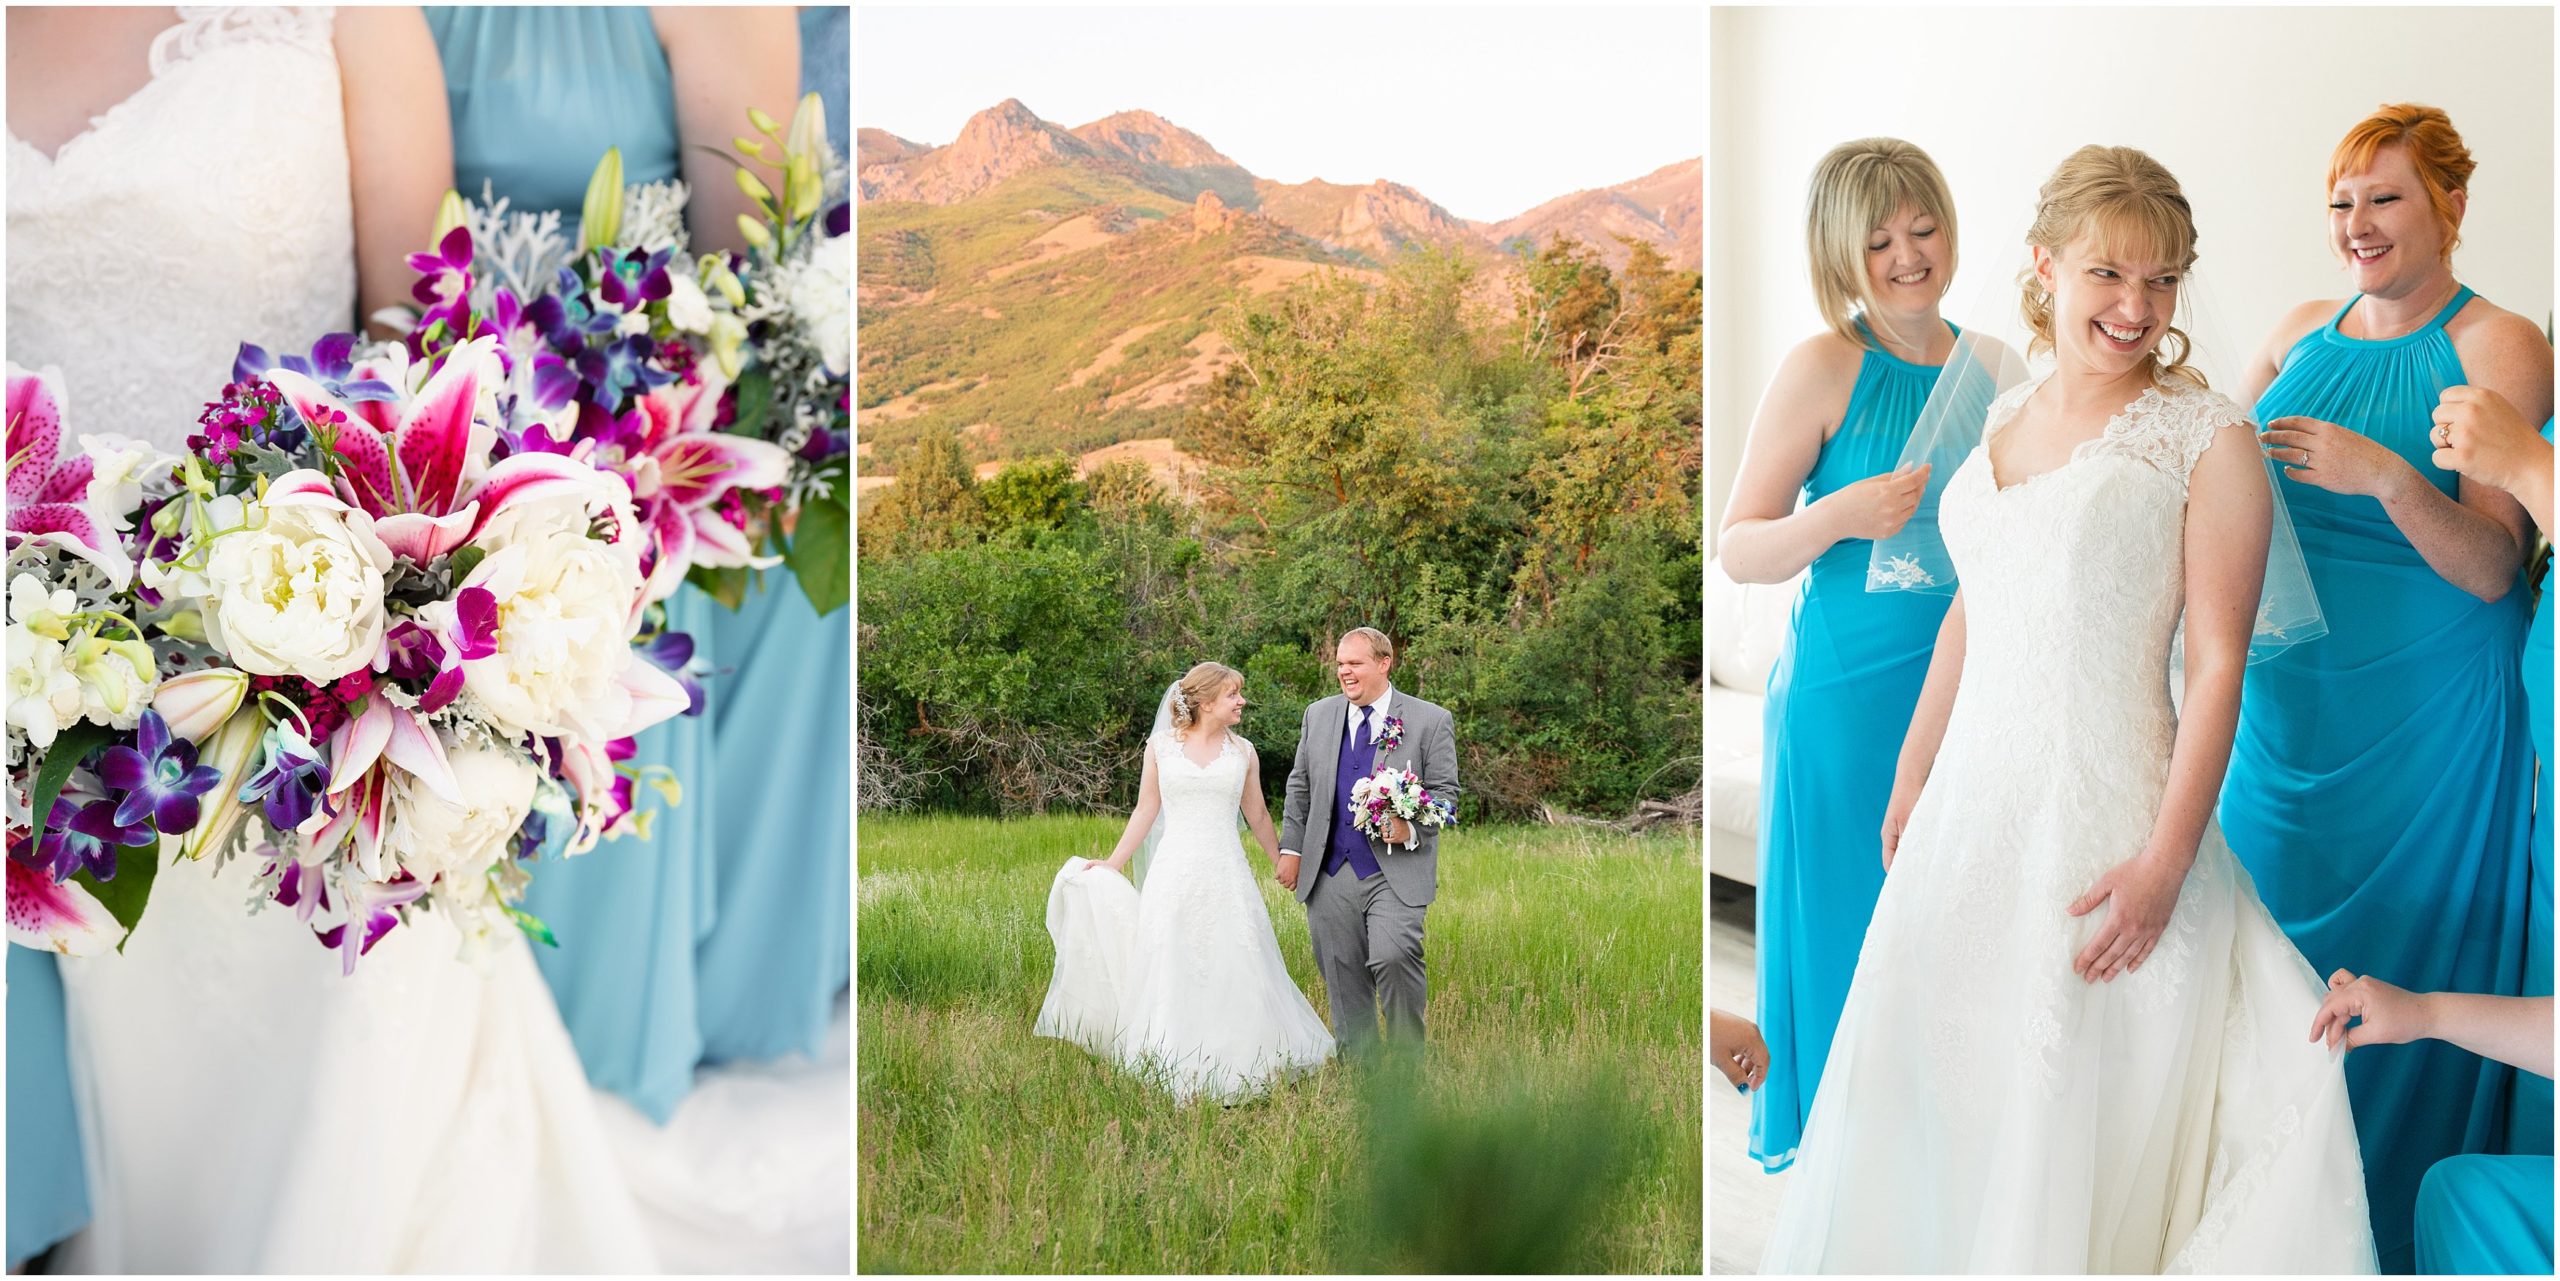 Orchid Inspired Summer Wedding at Oak Hills Utah | Jessie and Dallin Photography